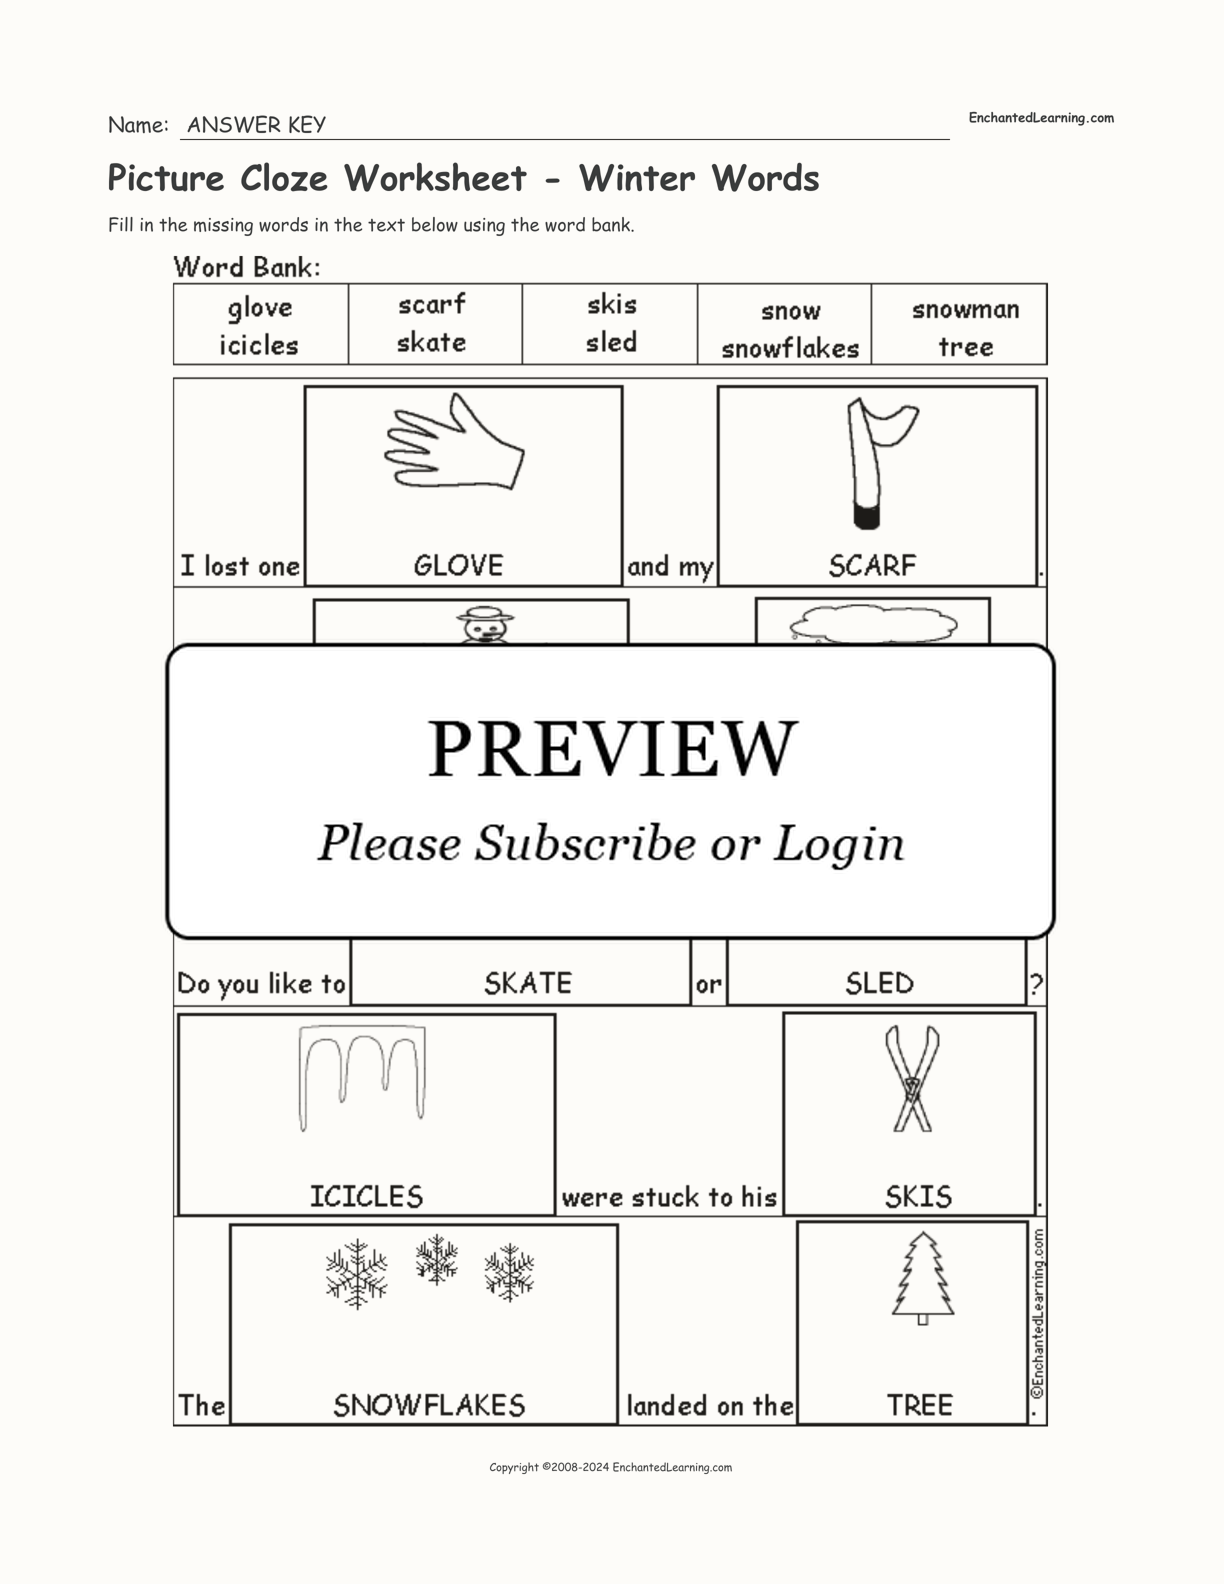 Picture Cloze Worksheet - Winter Words interactive worksheet page 2